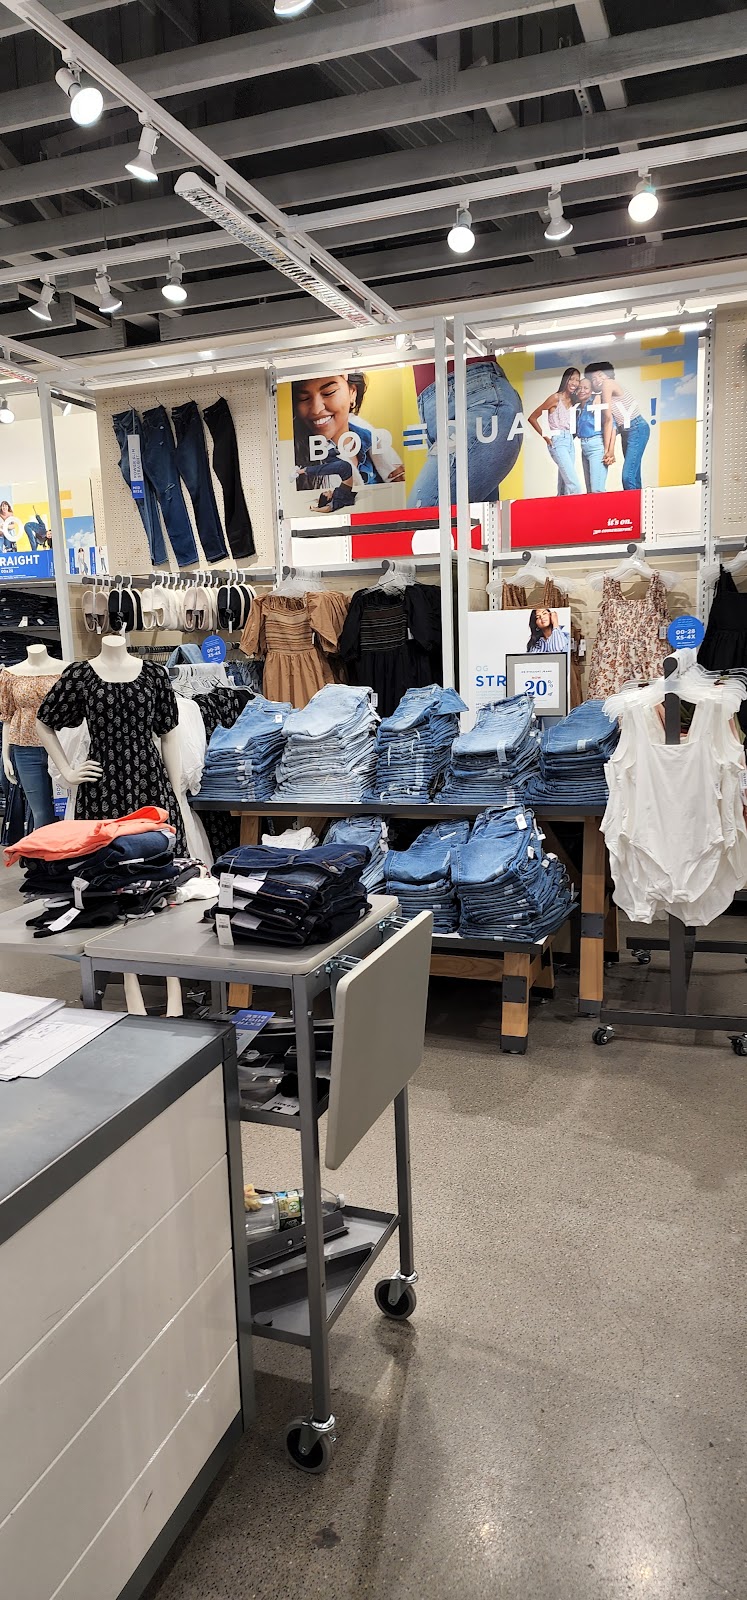 Old Navy Outlet | 624 Race Track Lane, Central Valley, NY 10917 | Phone: (845) 928-6992